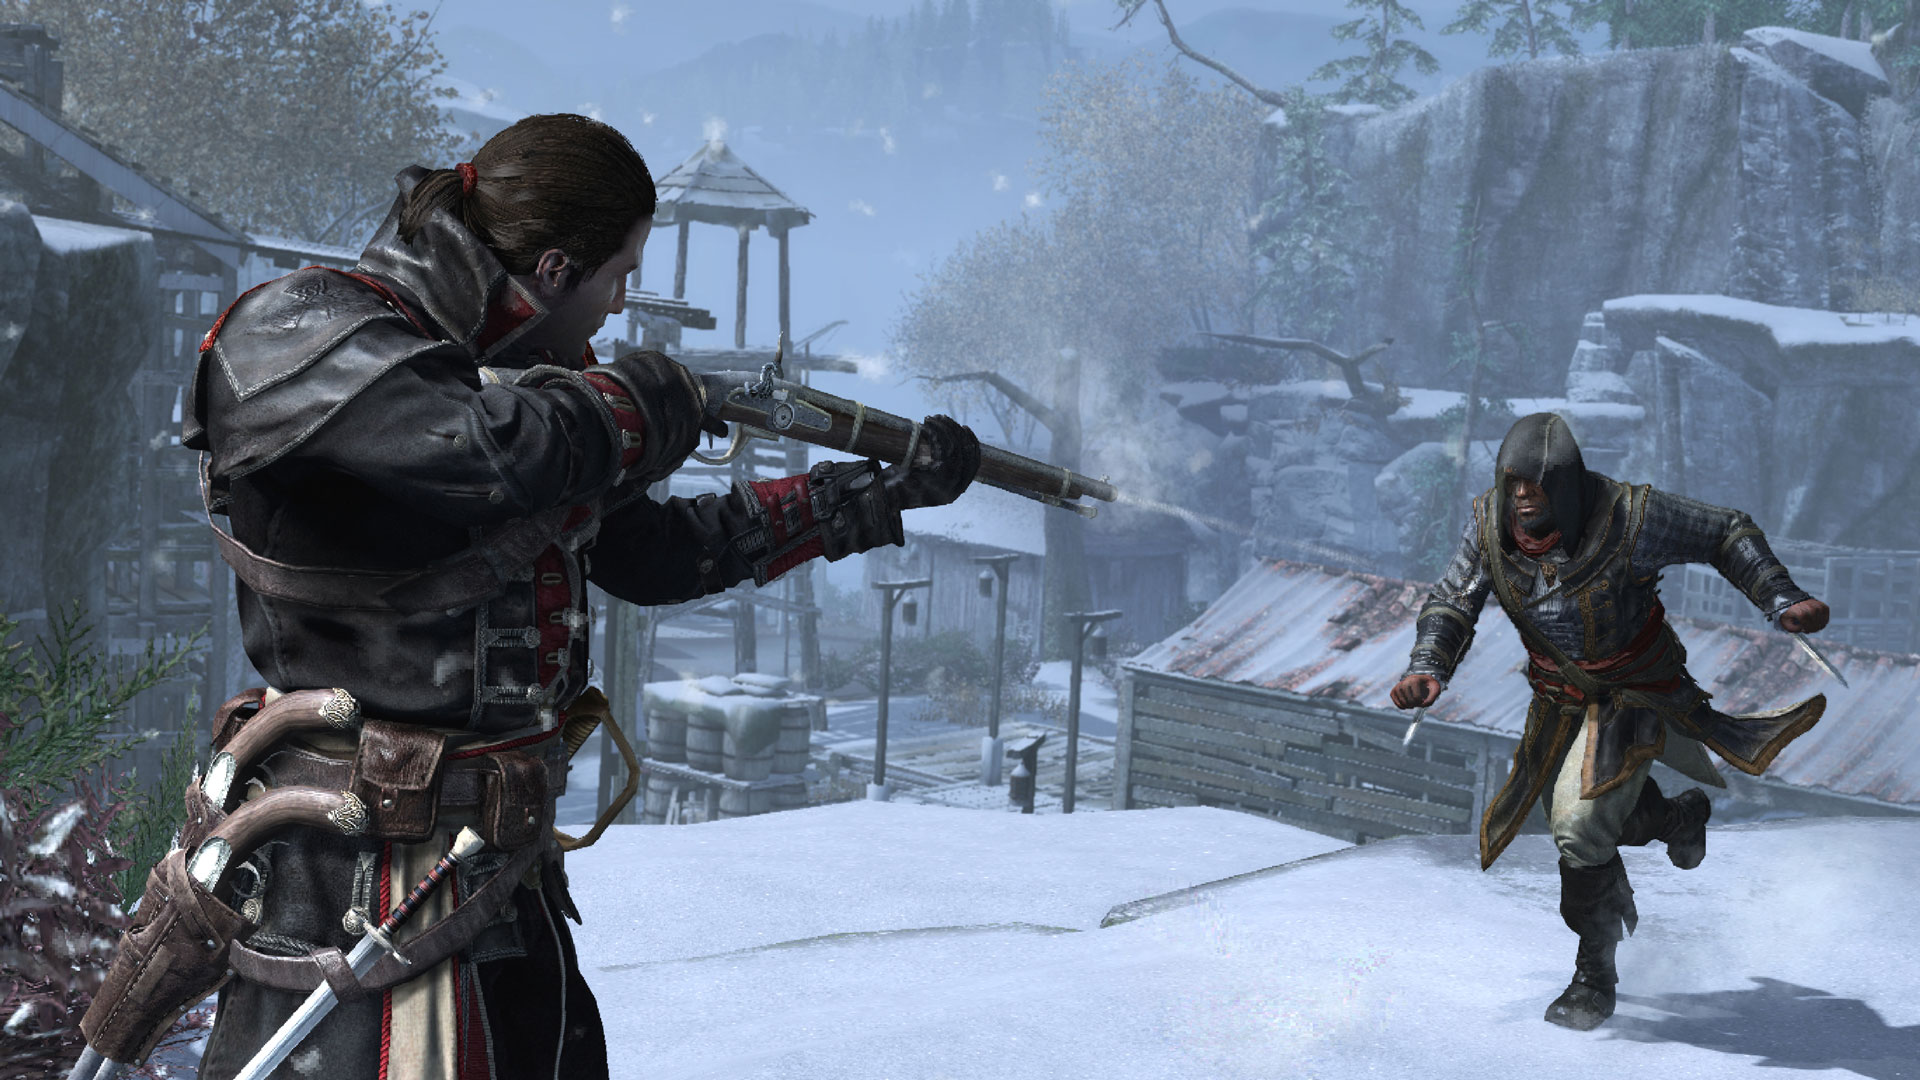 Media asset in full size related to 3dfxzone.it news item entitled as follows: Ubisoft promette gameplay in 4K con Assassin's Creed Rogue Remastered | Image Name: news27685_Assassin-s-Creed-Rogue-Remastered-Screenshot_3.jpg